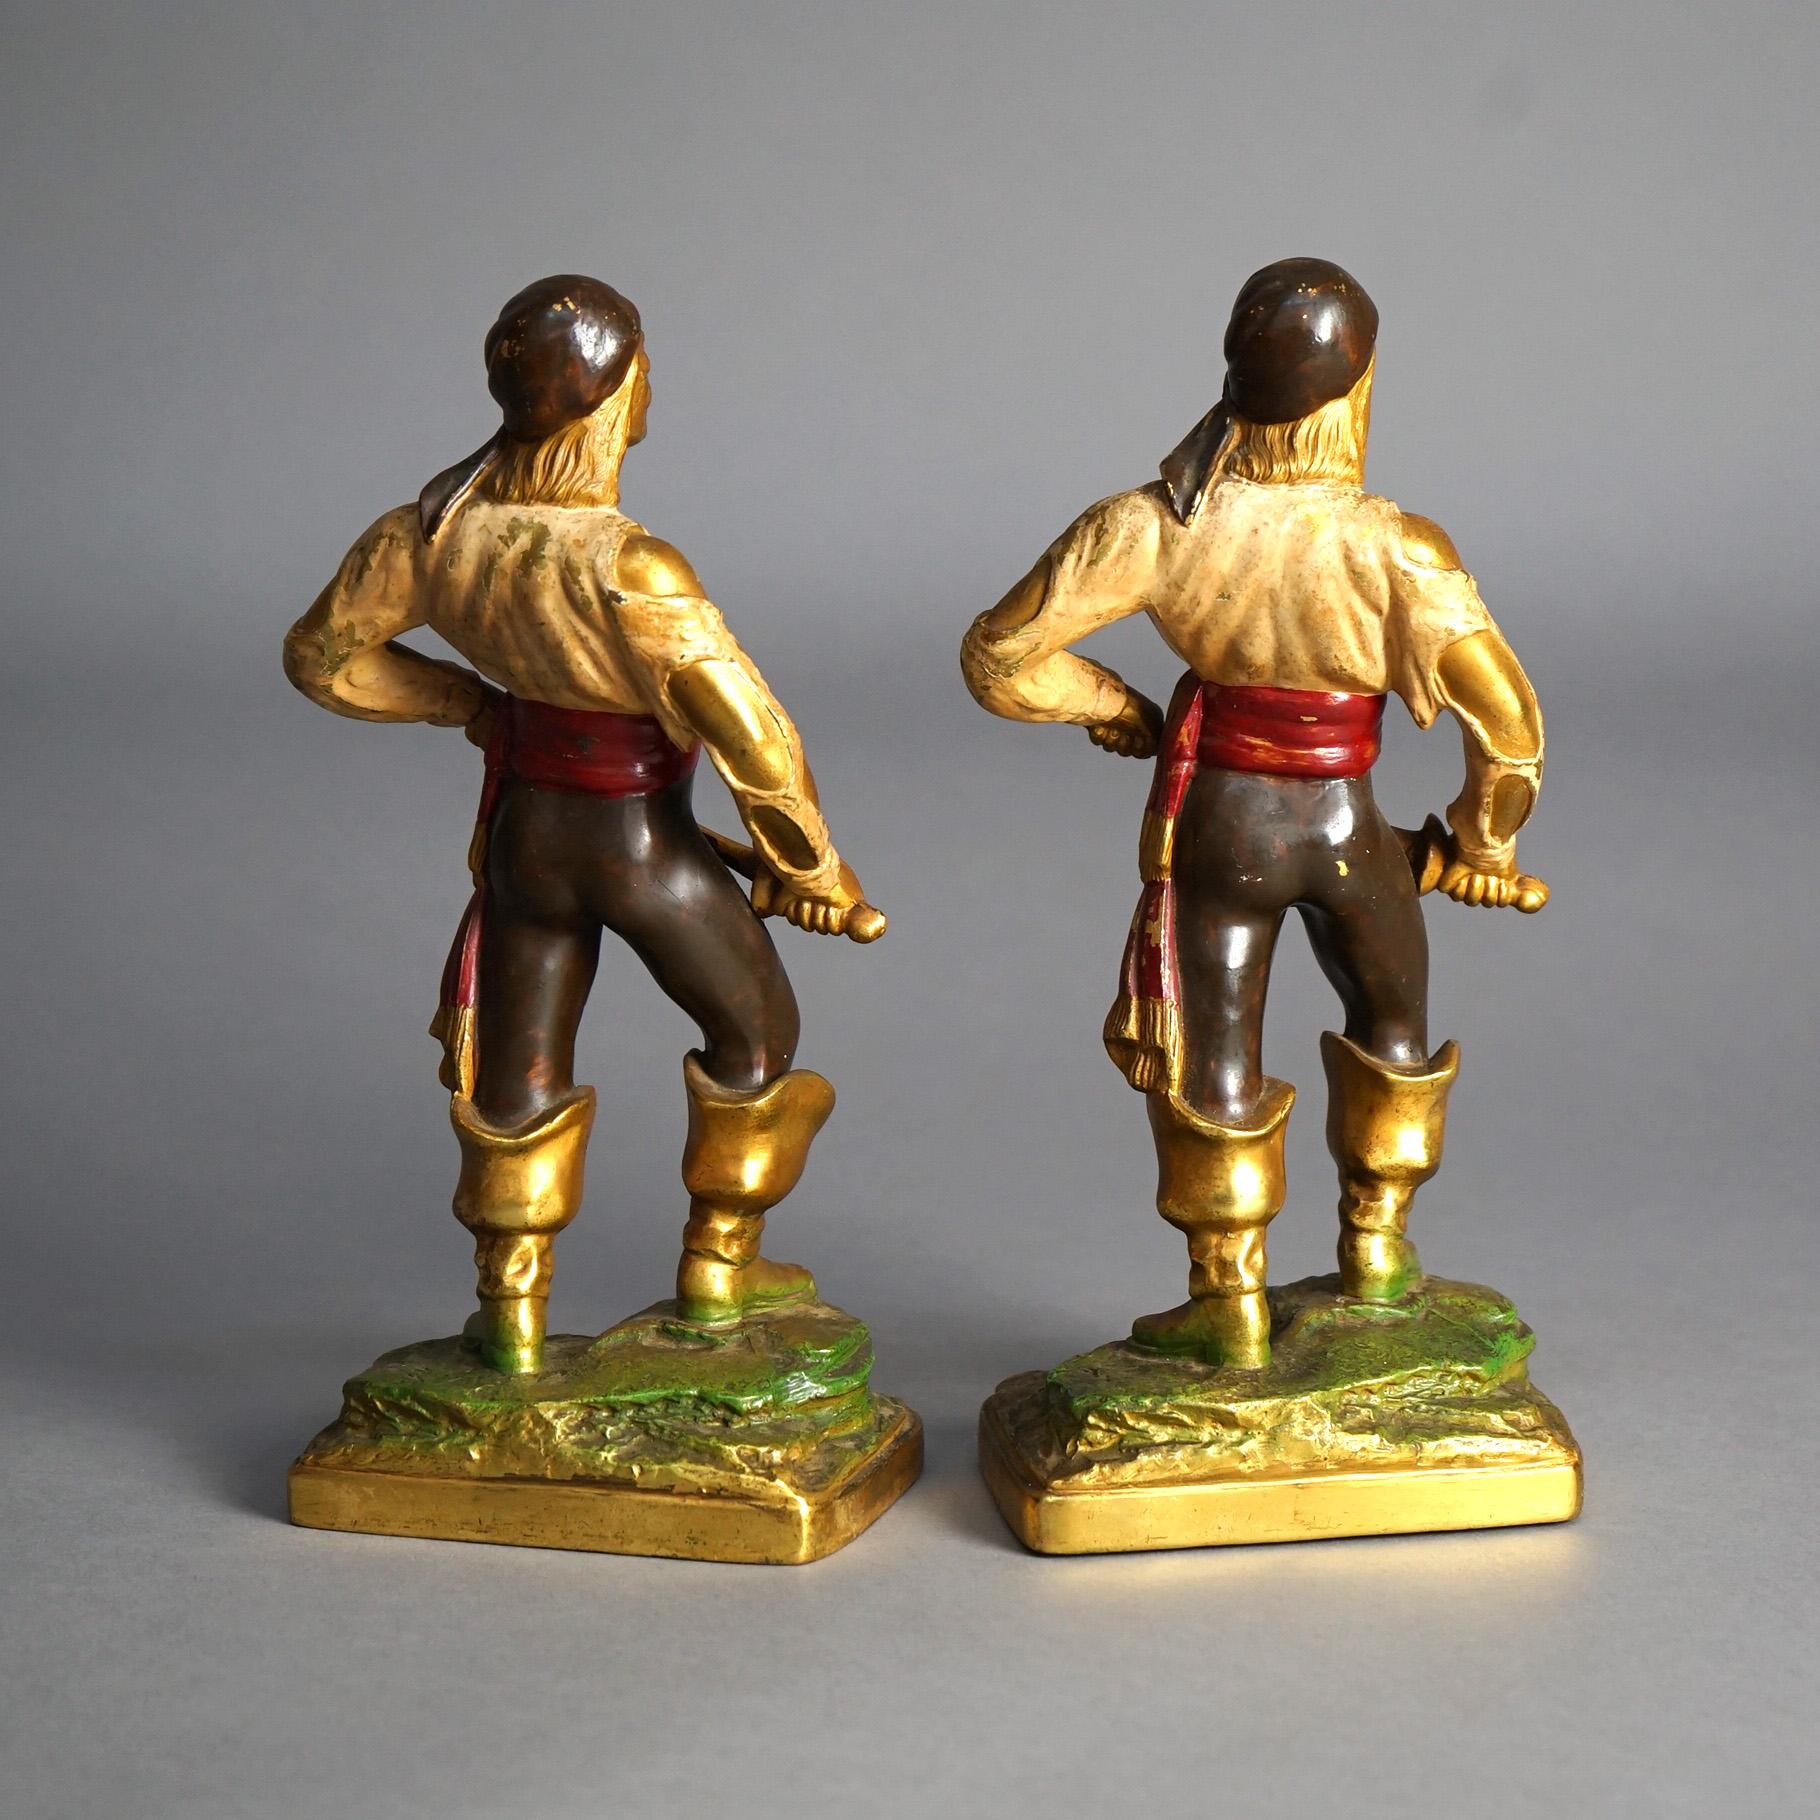 Antique Pair of Polychrome & Bronzed Cast Metal Pirate Figures Circa 1930 For Sale 2